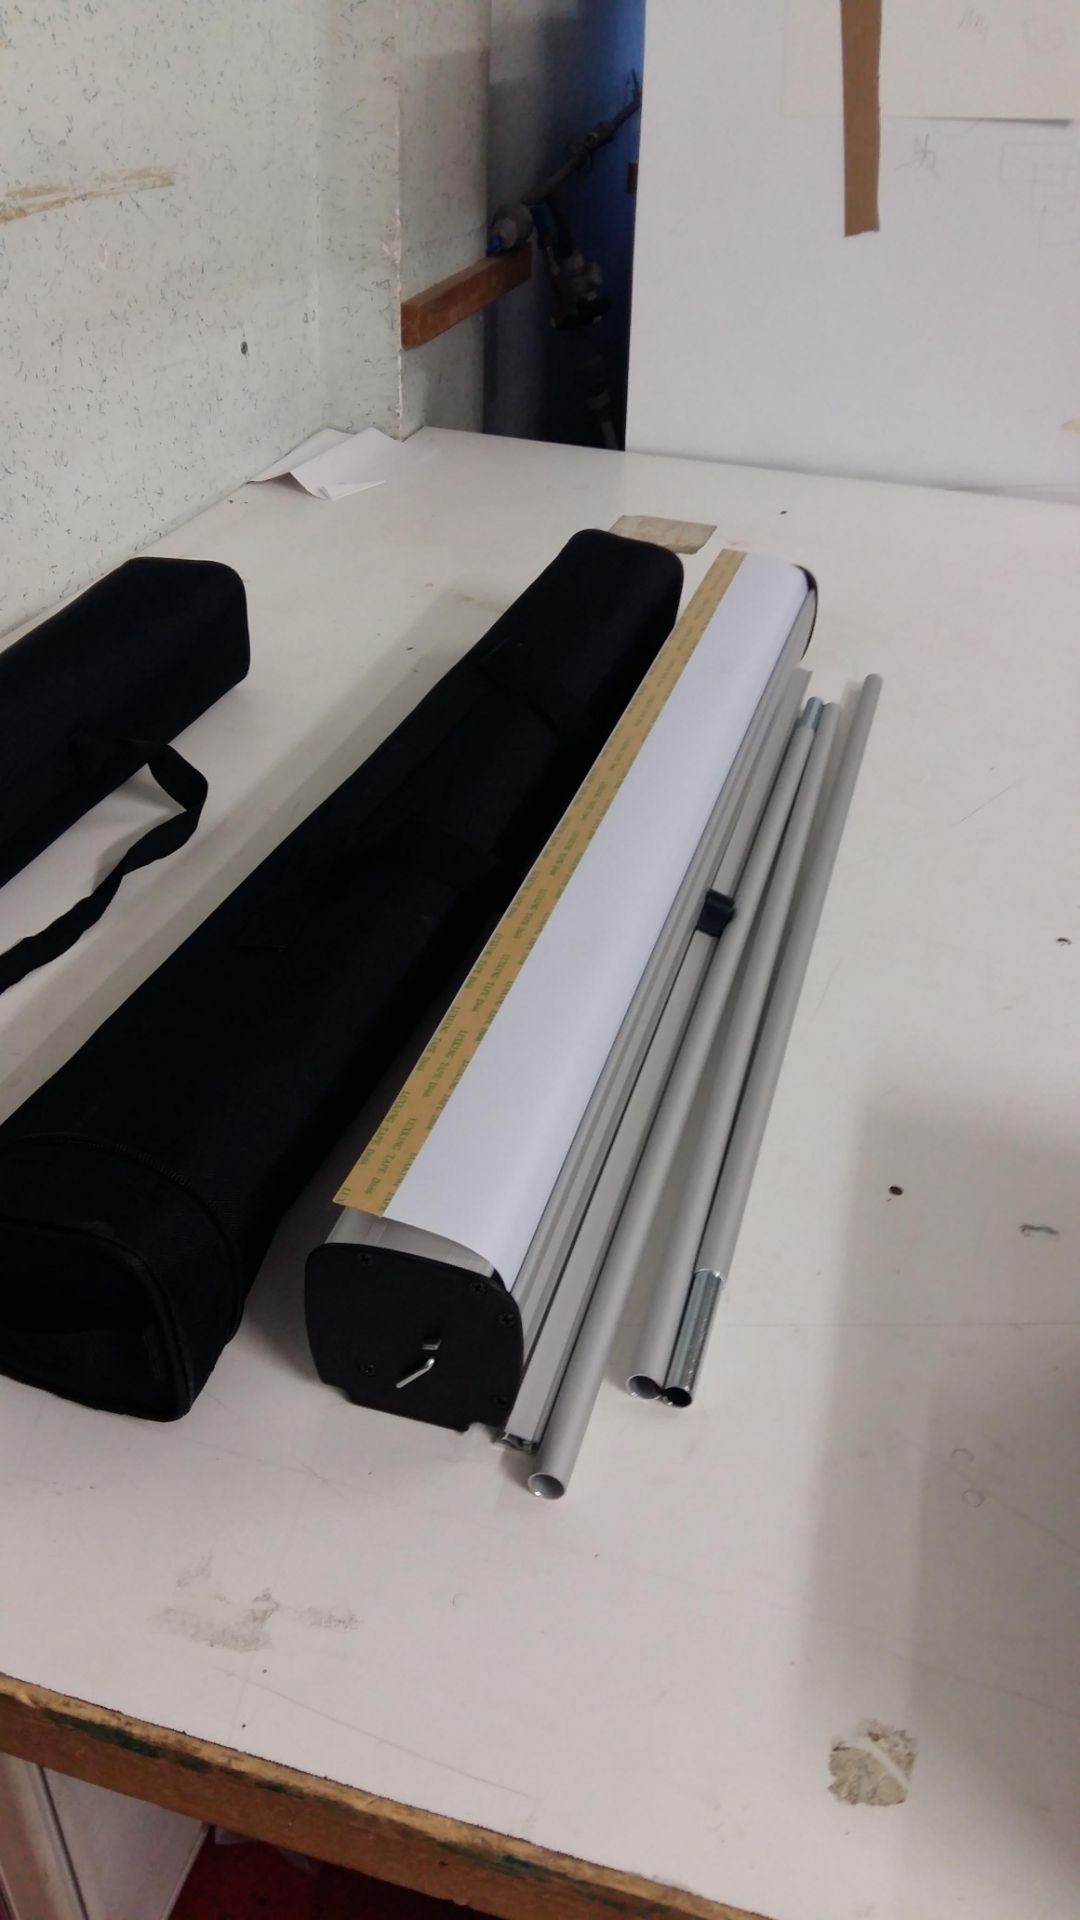 (6) 800mm Expand Media Roll Up Banners - Brand New in Box - Image 2 of 5